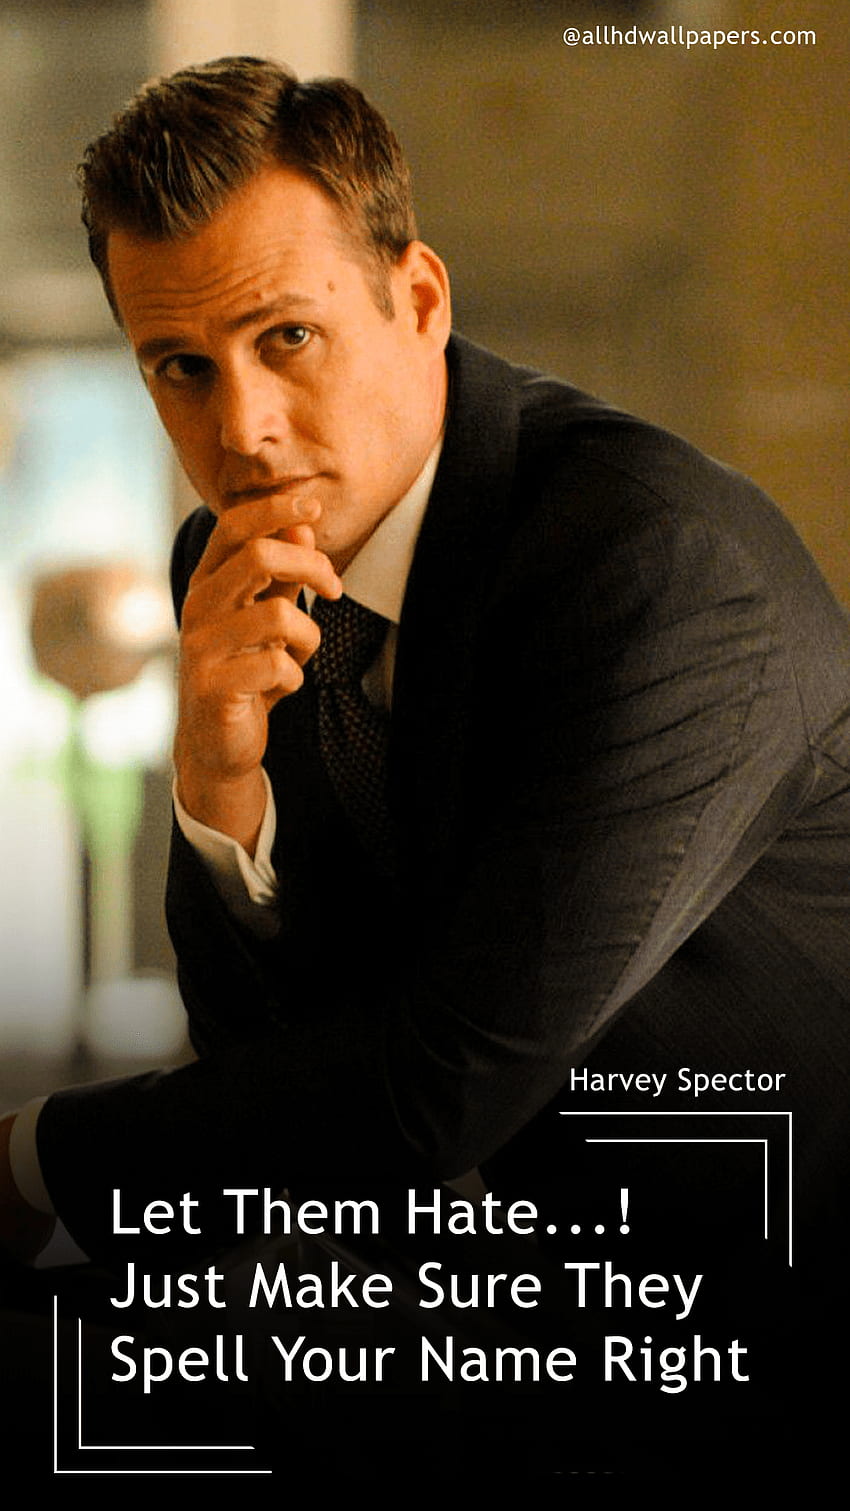 Harvey Specter Quotes - Harvey Specter - & Background, Suits Quotes HD phone wallpaper